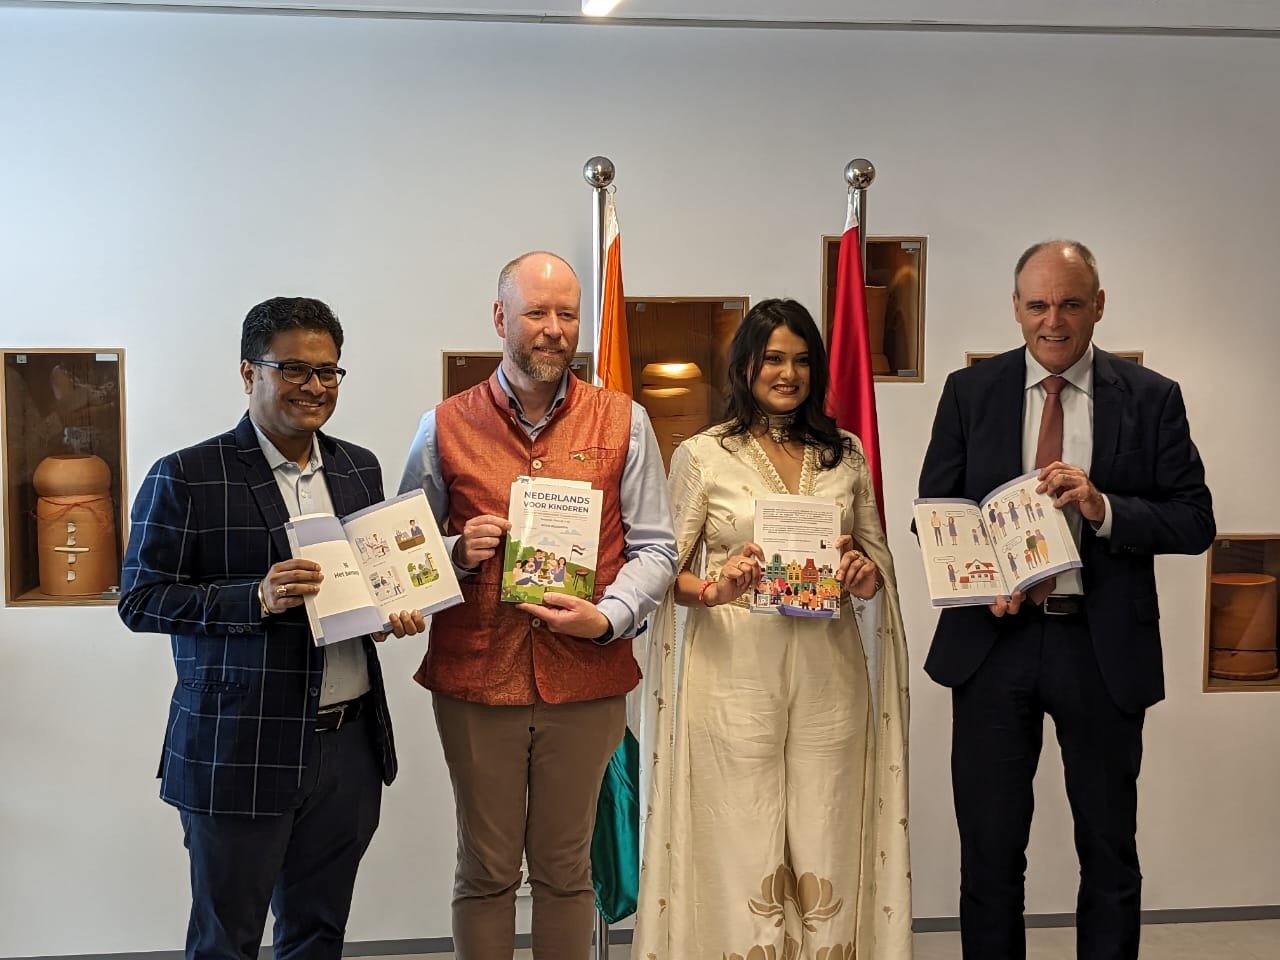 First Official Dutch Language Textbook in India!